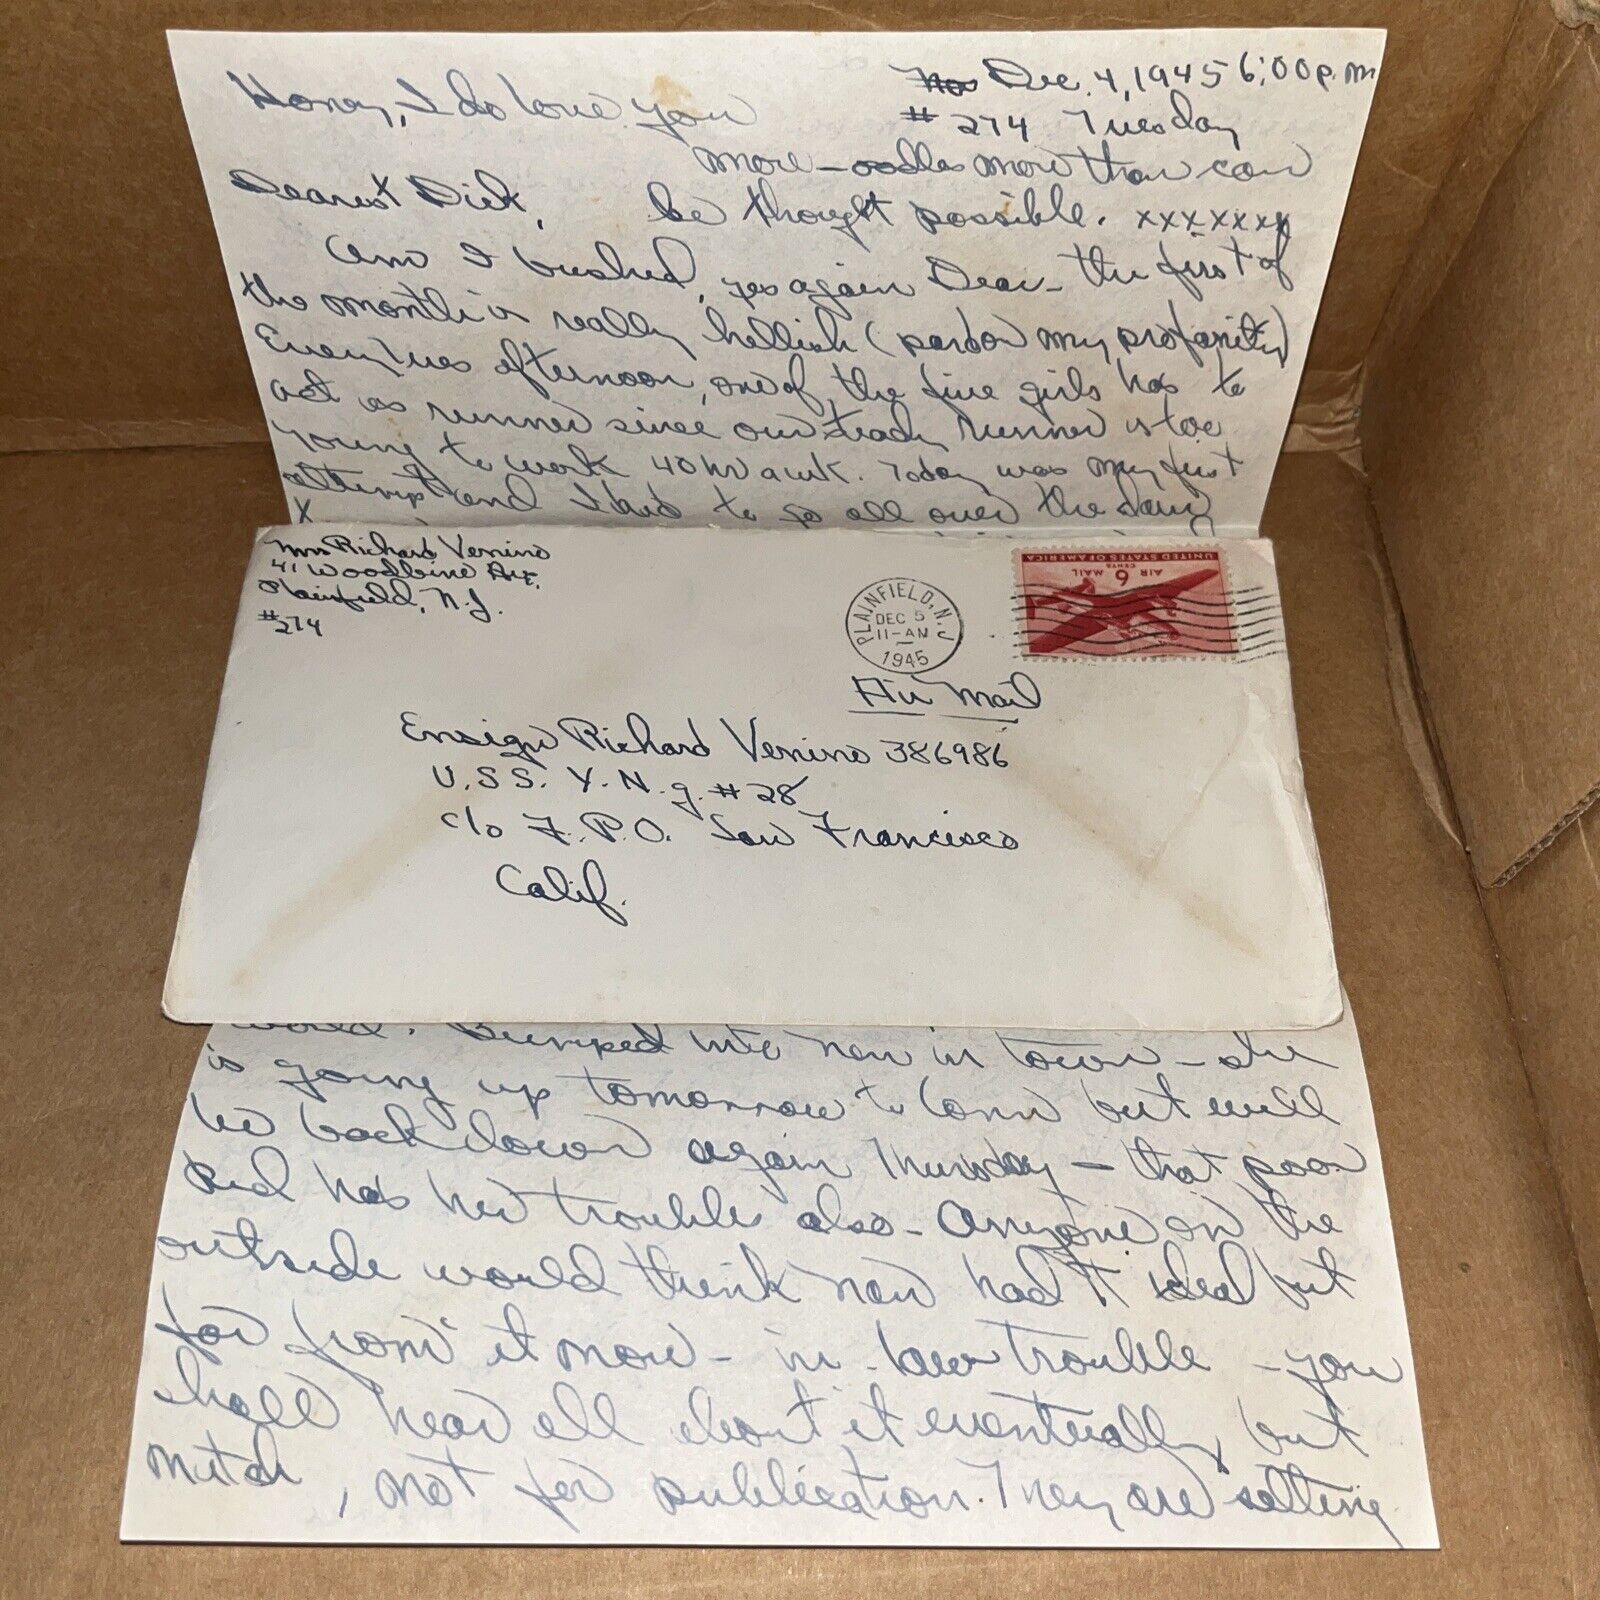 1945 Love Letter from Wife, Post WWII, to US Navy Ensign Columbia Pays Out Bonus